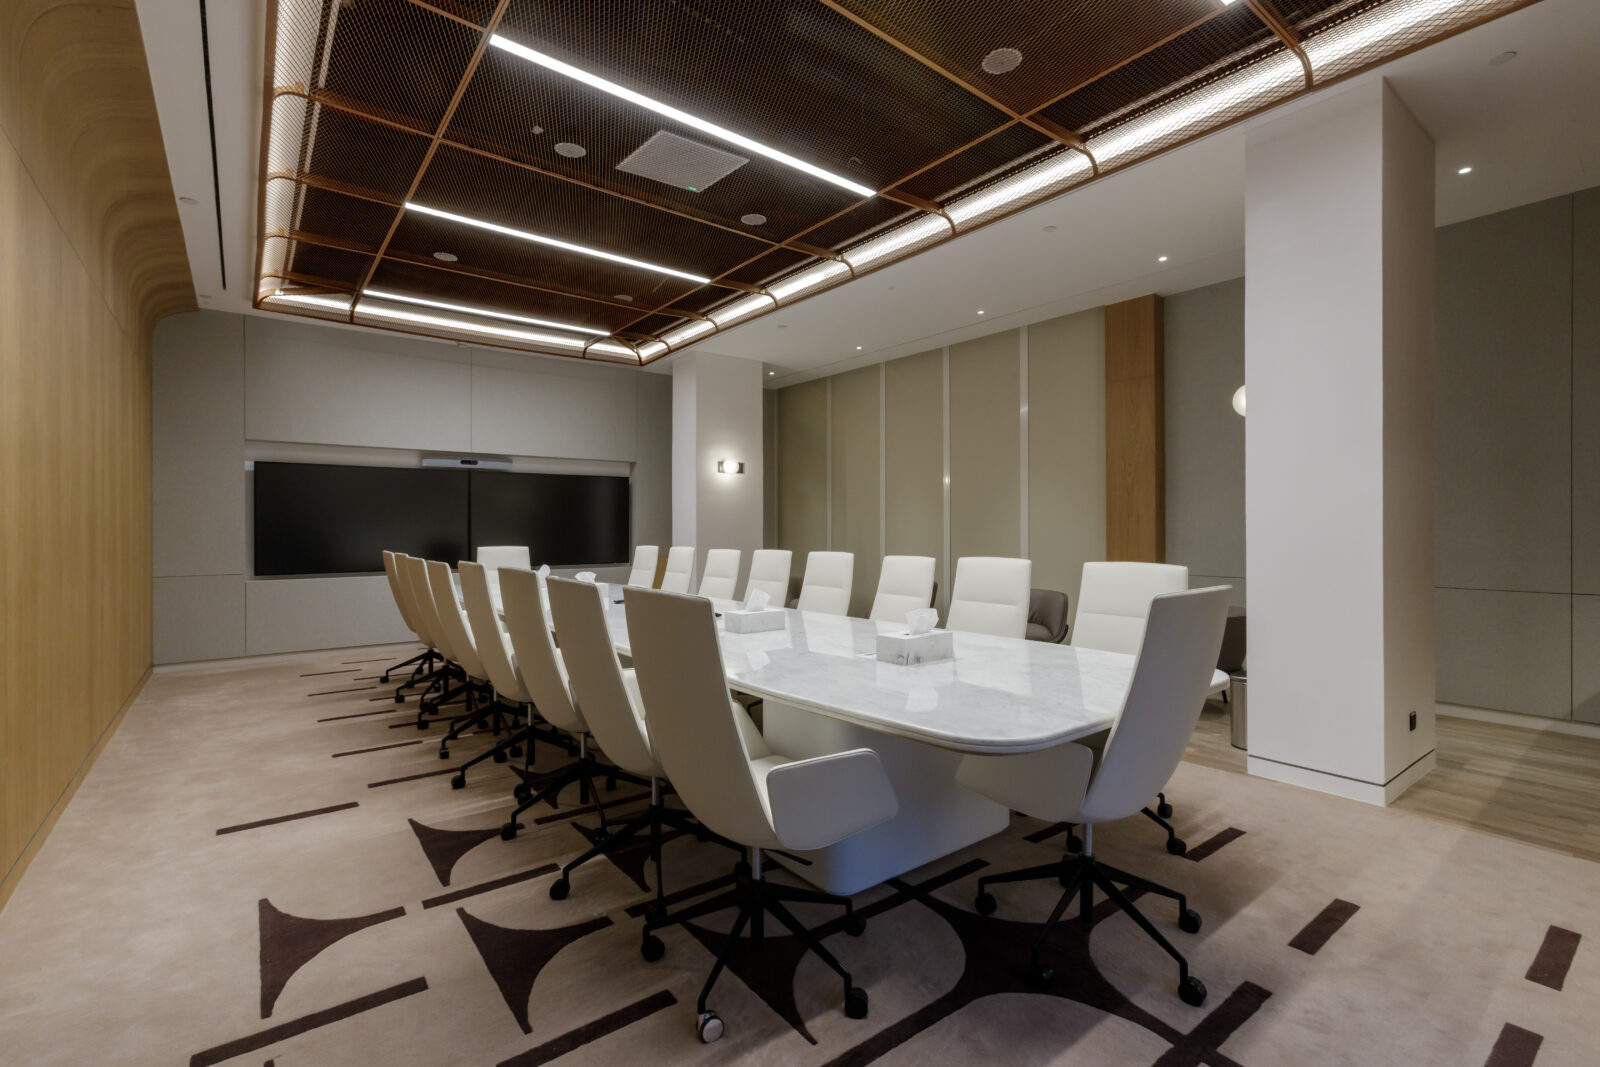 Architectural Lighting Scheme Renowned Investment Company Private Client Conference Room Integrated Illumination Dubai Consultants Studio N